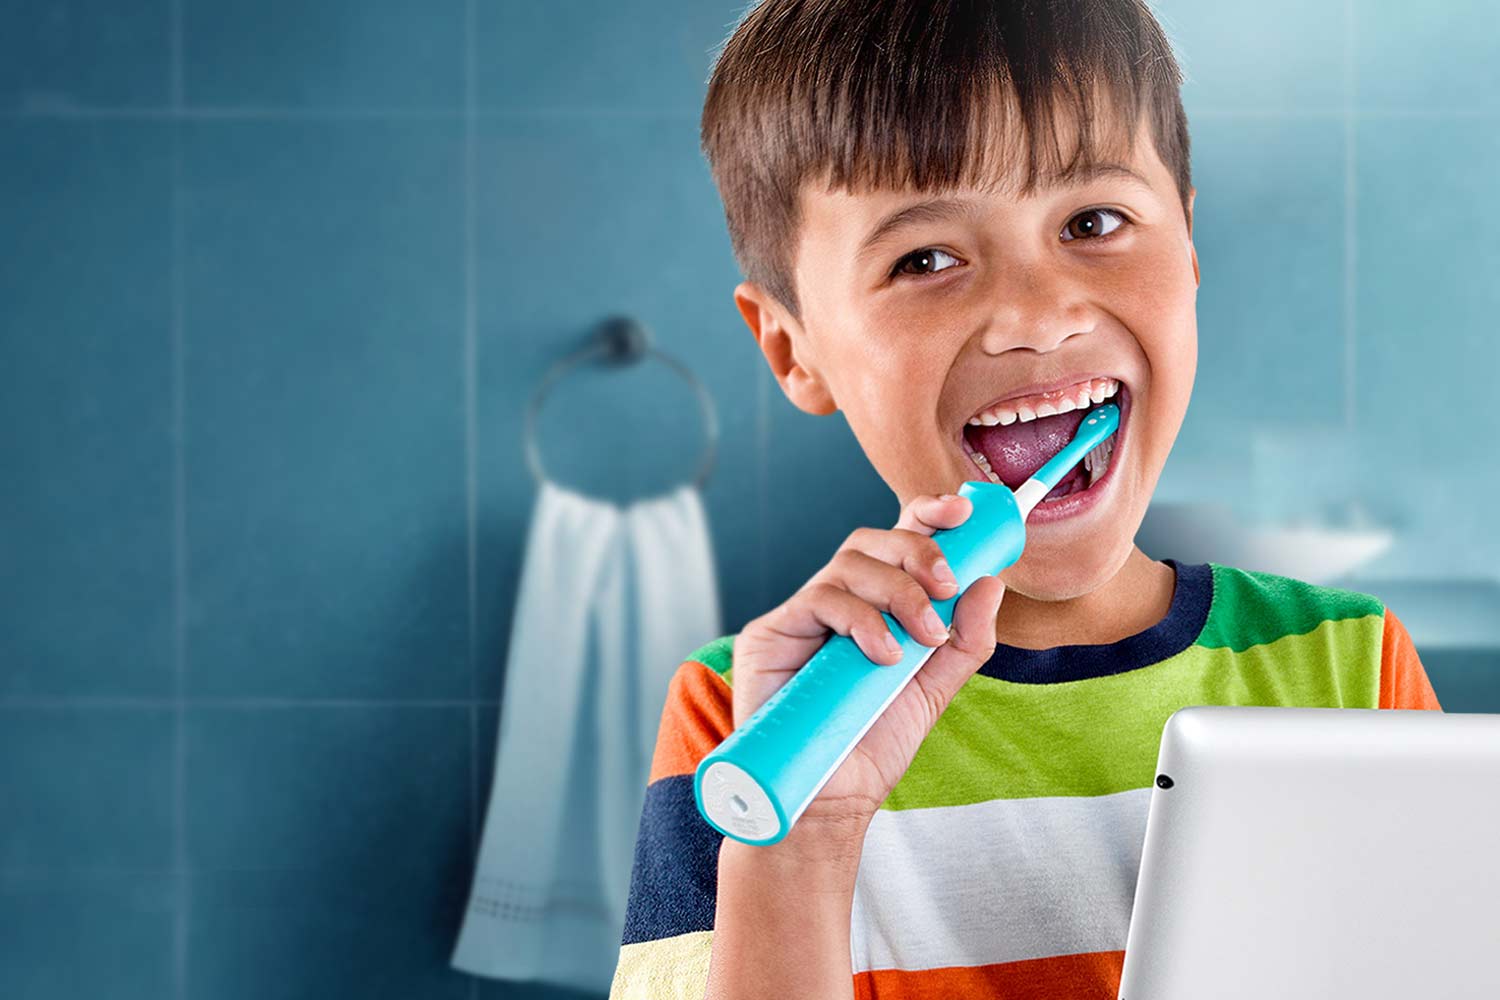 philips sonicare bluetooth toothbrush has a coaching app for kids connected usp0 00